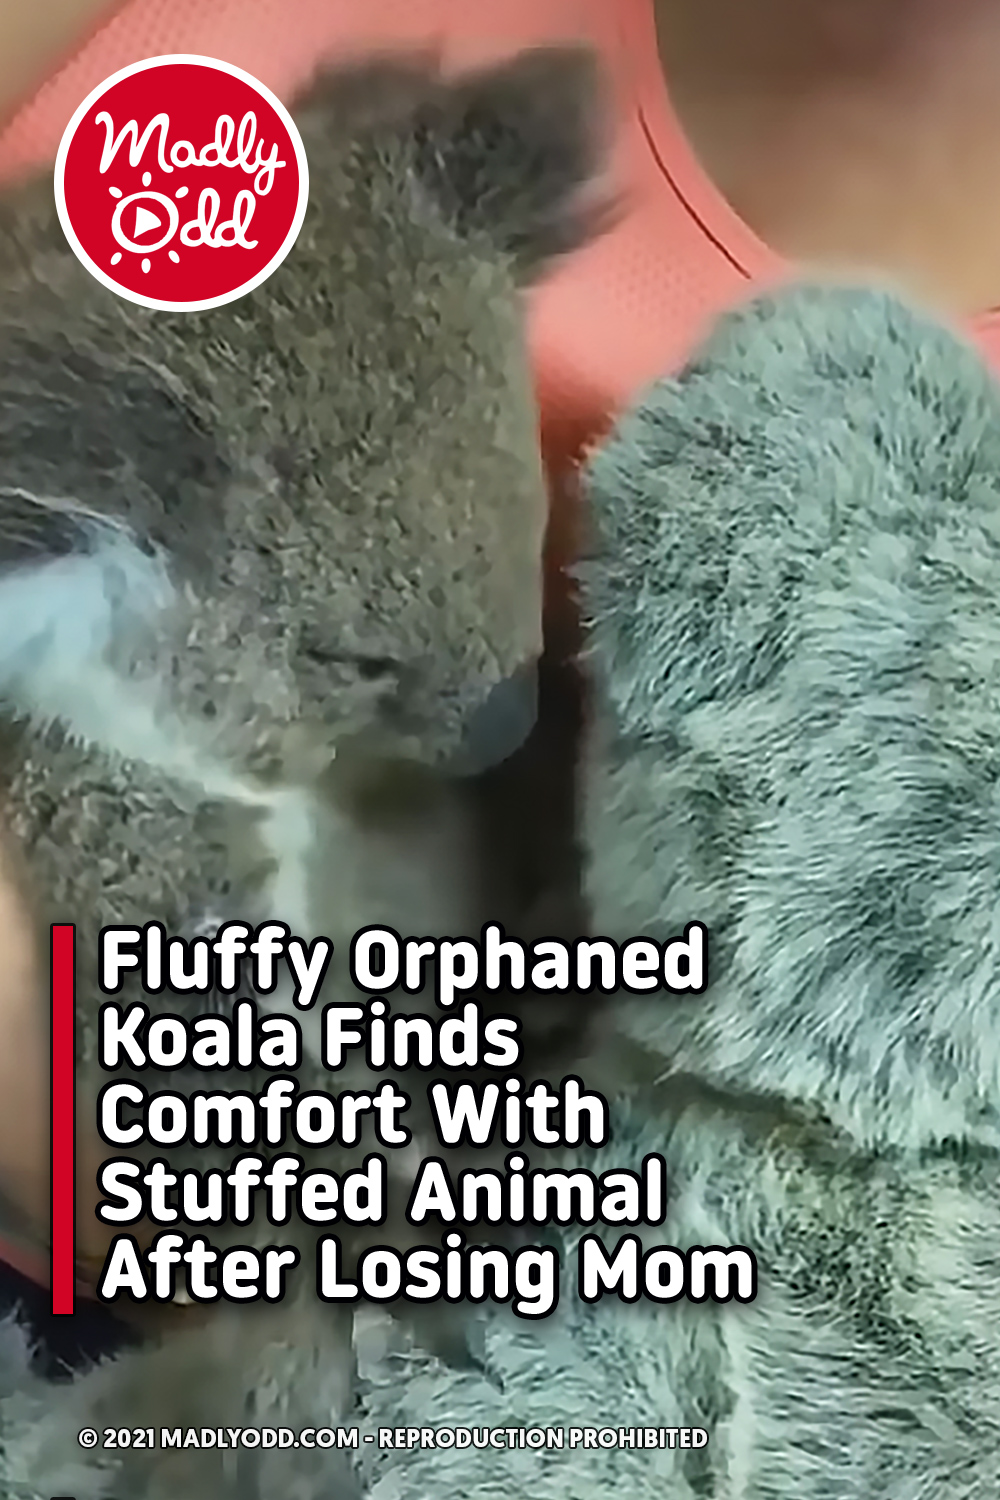 Fluffy Orphaned Koala Finds Comfort With Stuffed Animal After Losing Mom